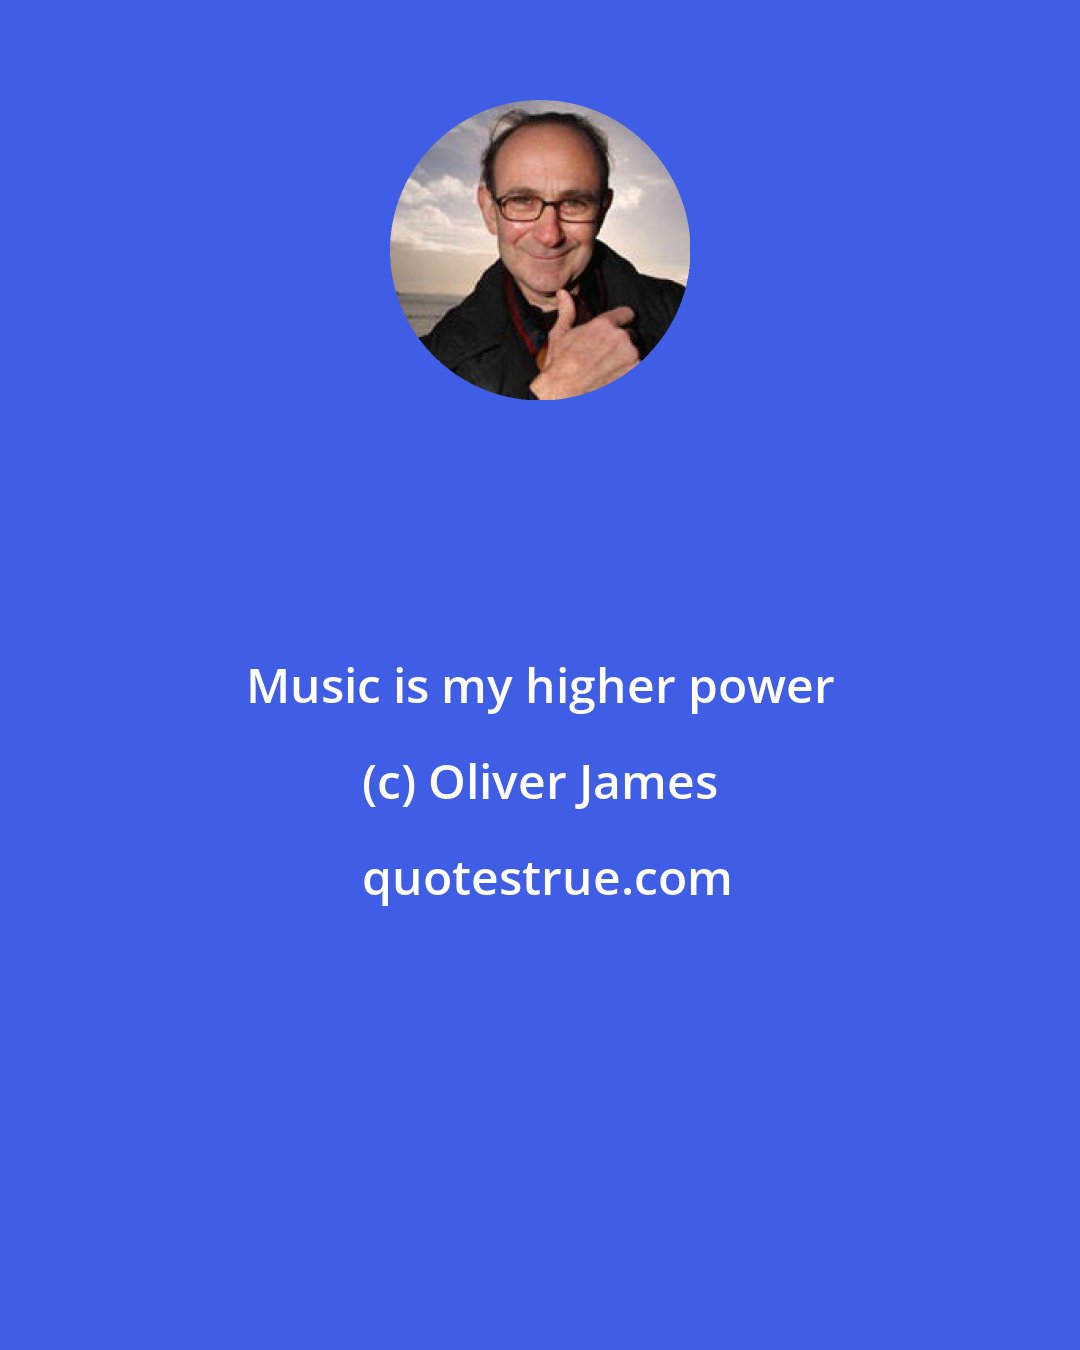 Oliver James: Music is my higher power